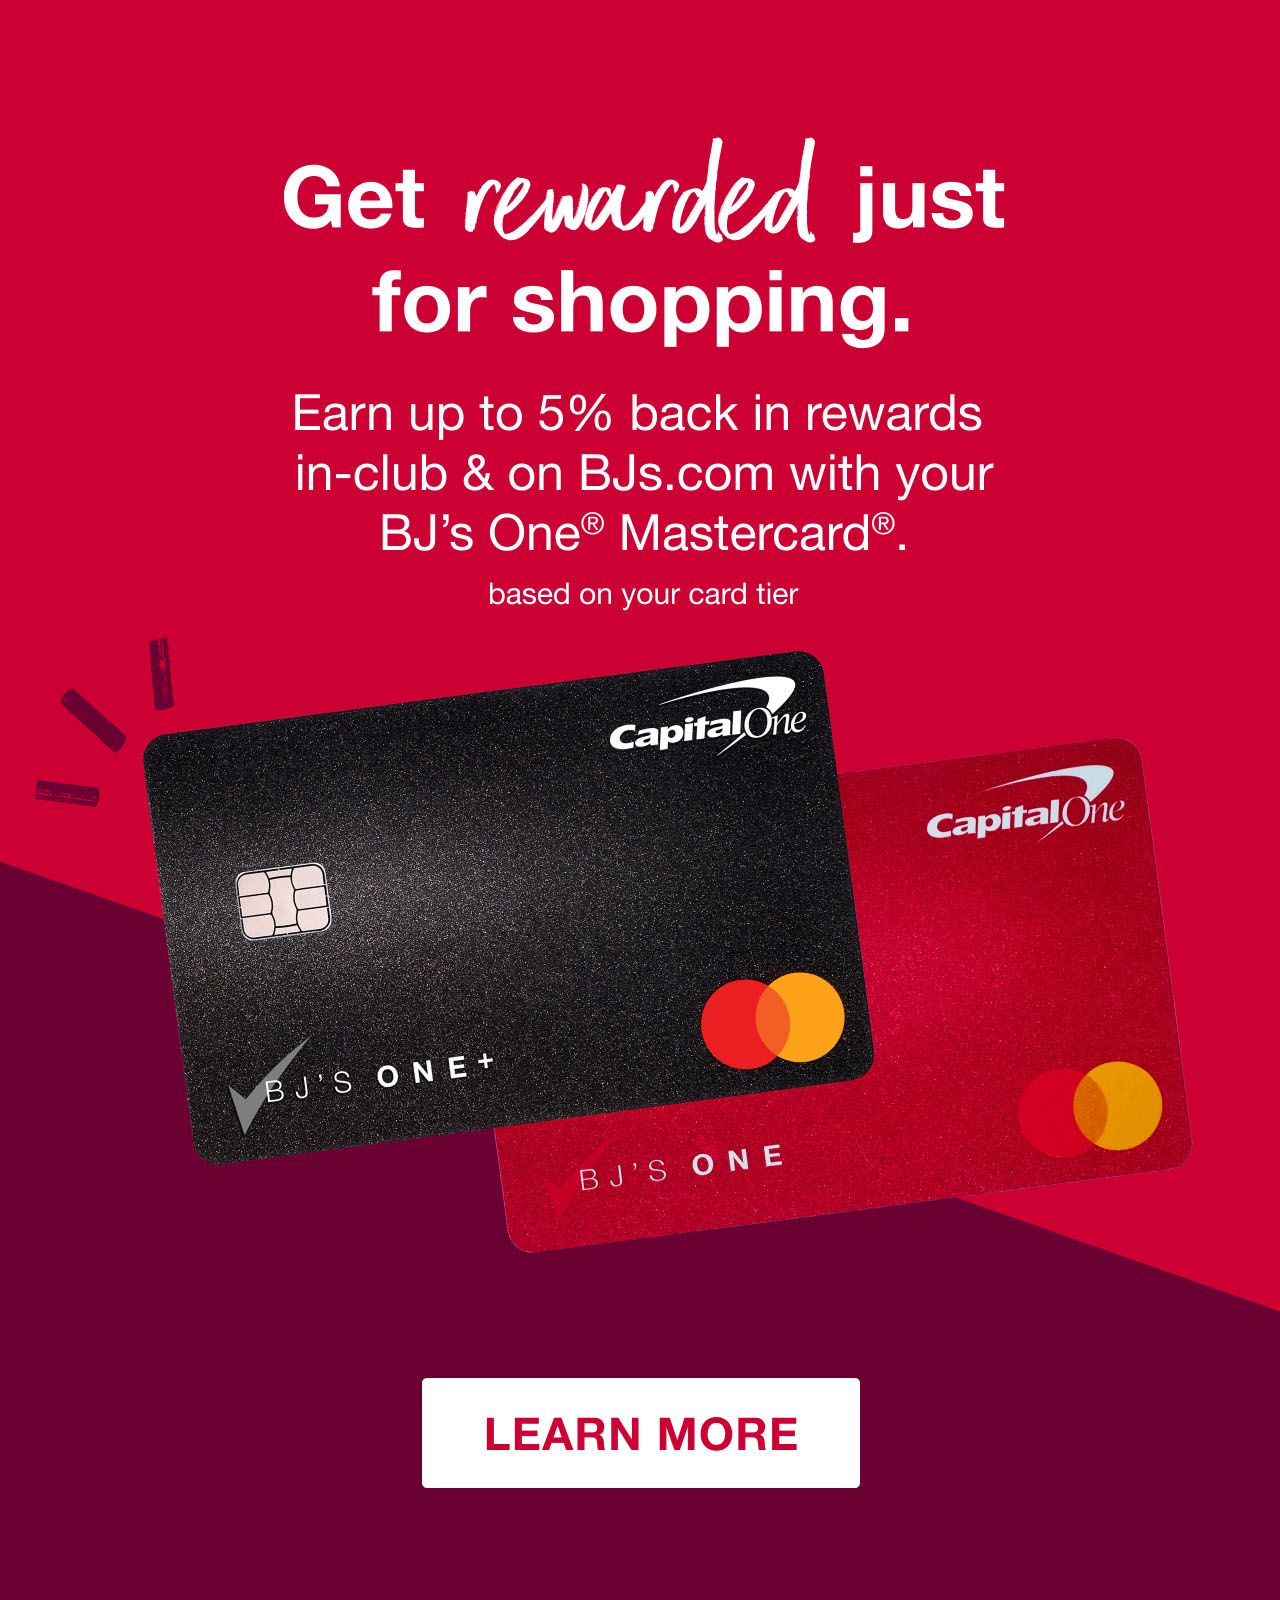 Tomayto, Tomahto - we've got fresh rewards. Up to 5% back(1) in rewards(2) on most in-club and BJs.com purchases. Based on your card tier. up to 15 cents off/gal(4) every day at BJ's Gas®. Based on your card tier. Up to 2% back(3) in rewards(2) everywhere else Mastercard® is accepted. Based on your card tier. Click here to learn more. Mastercard and the circles design are registered trademarks of Mastercard International Incorporated. ©2023 BJ's Wholesale Club, Inc.